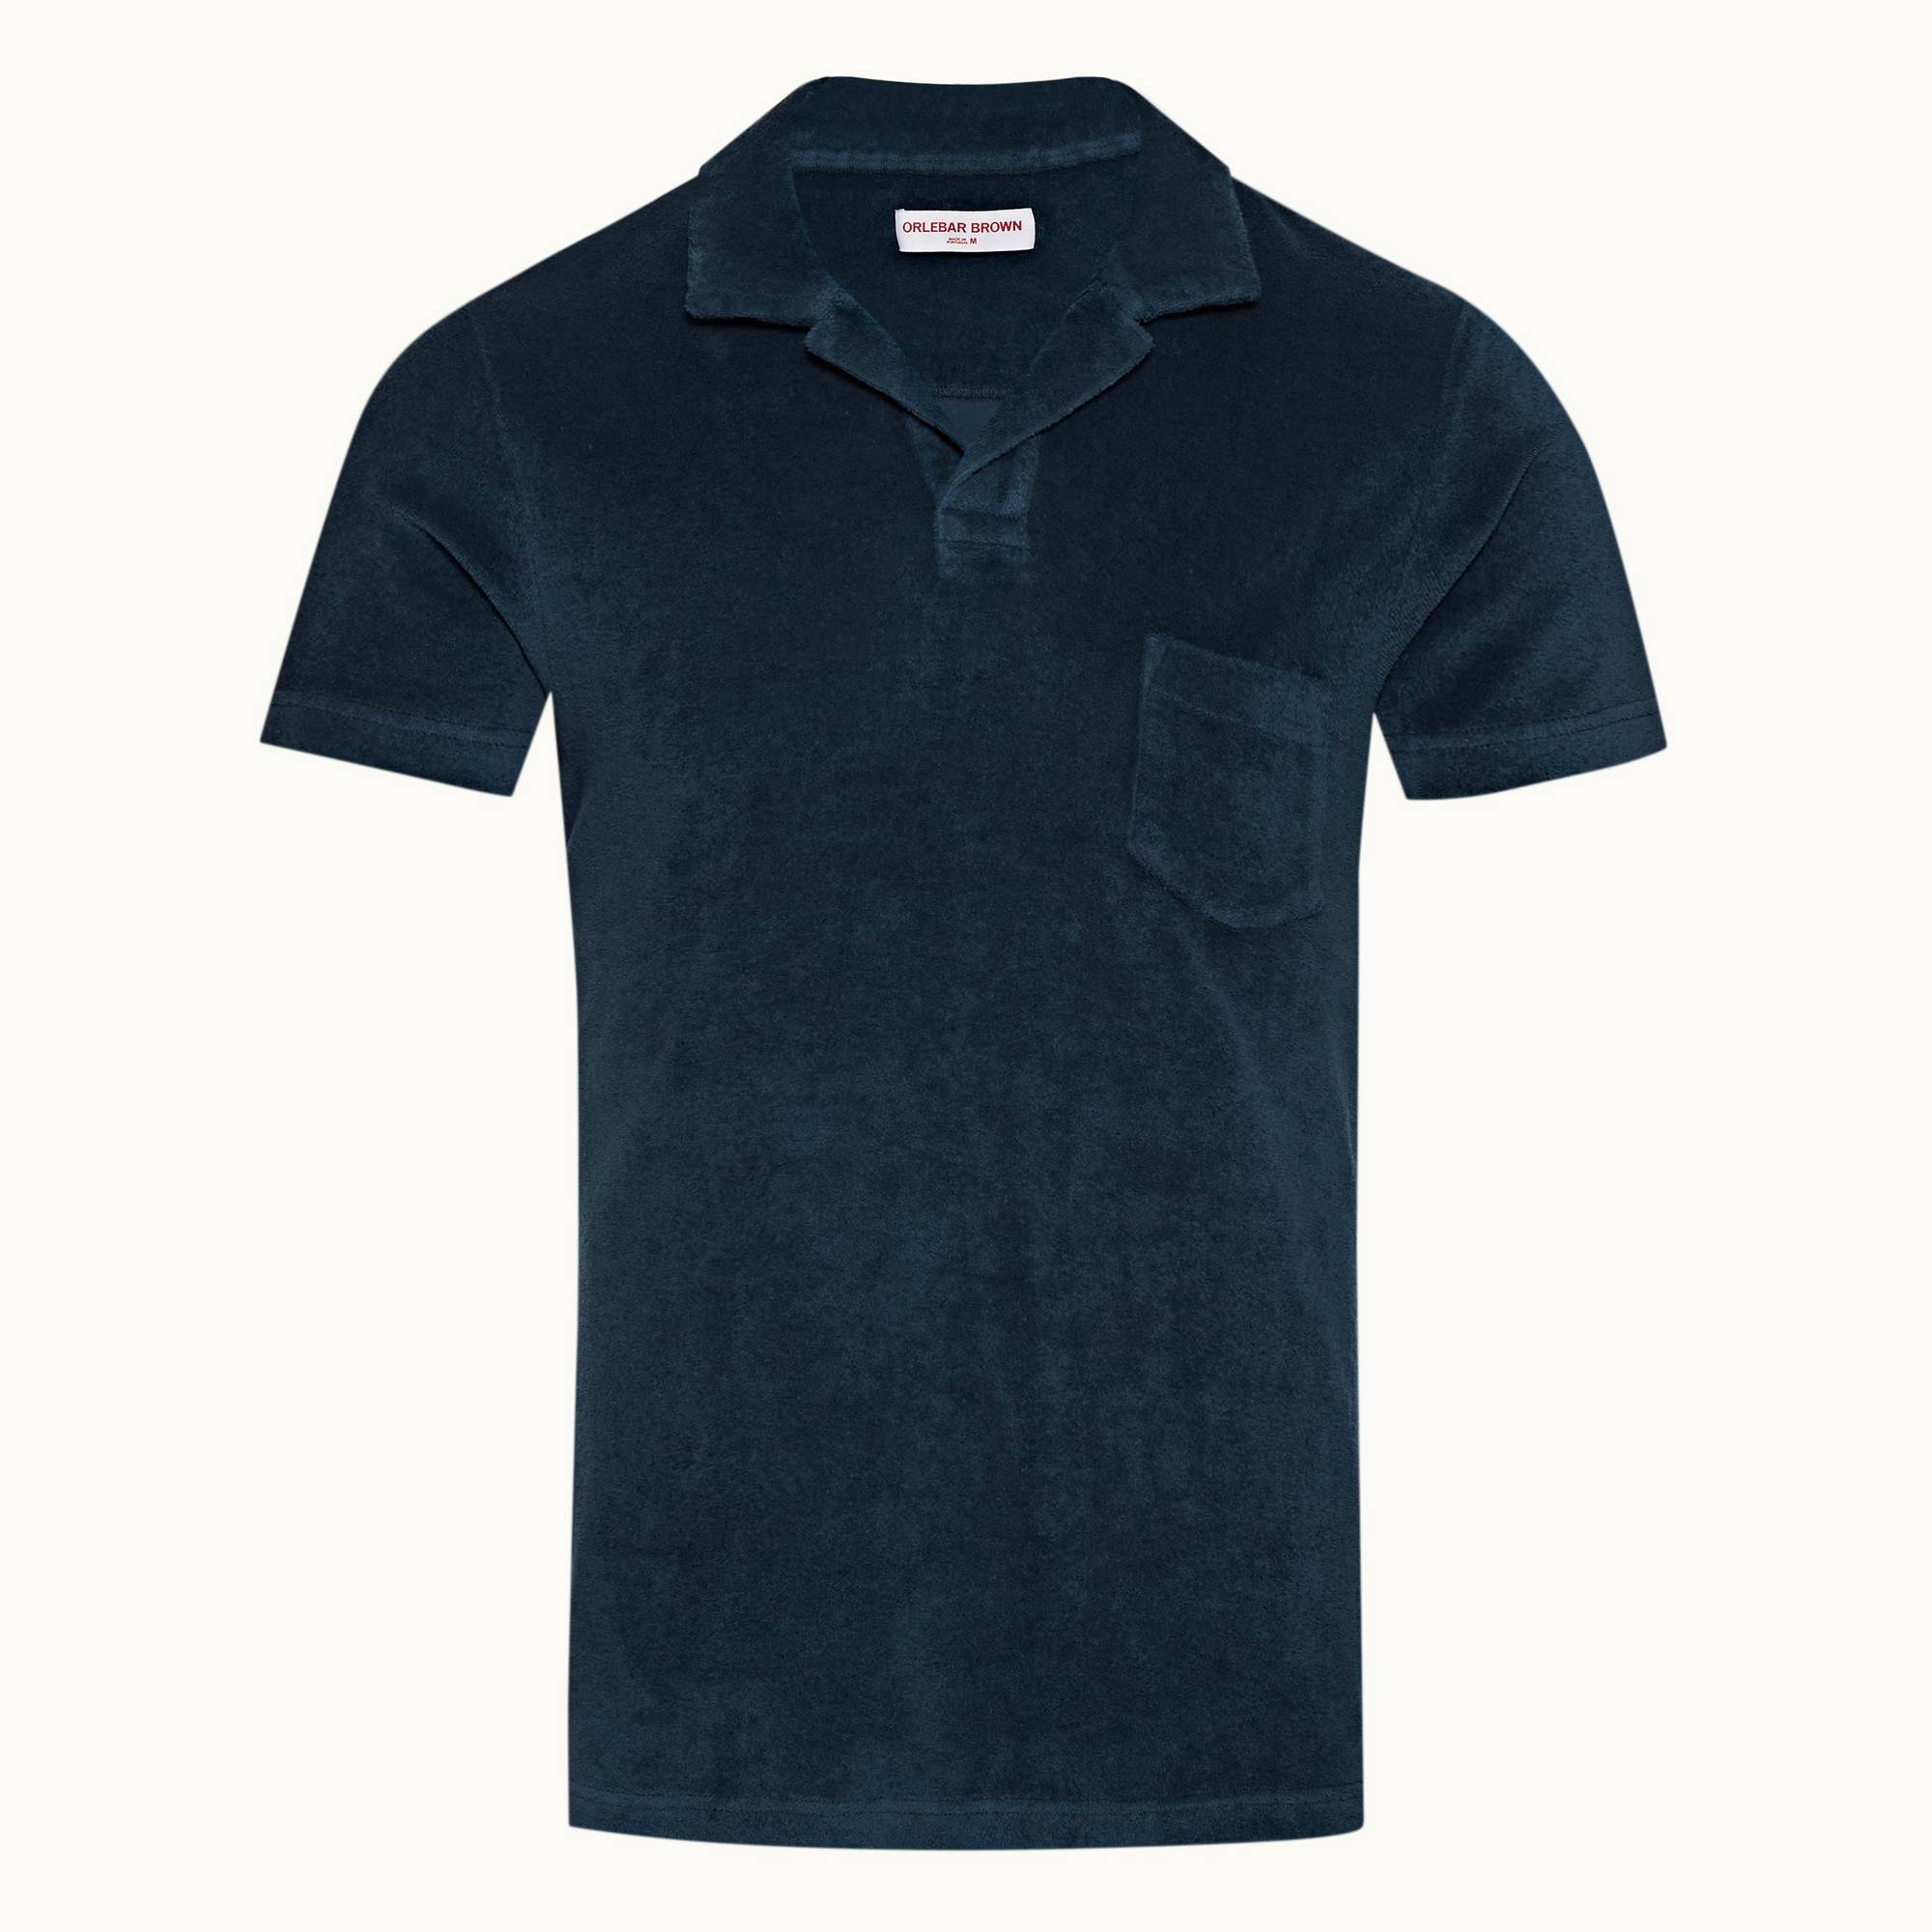 Terry Towelling - Mens Oceanic Blue Tailored Fit Towelling Resort Polo Shirt